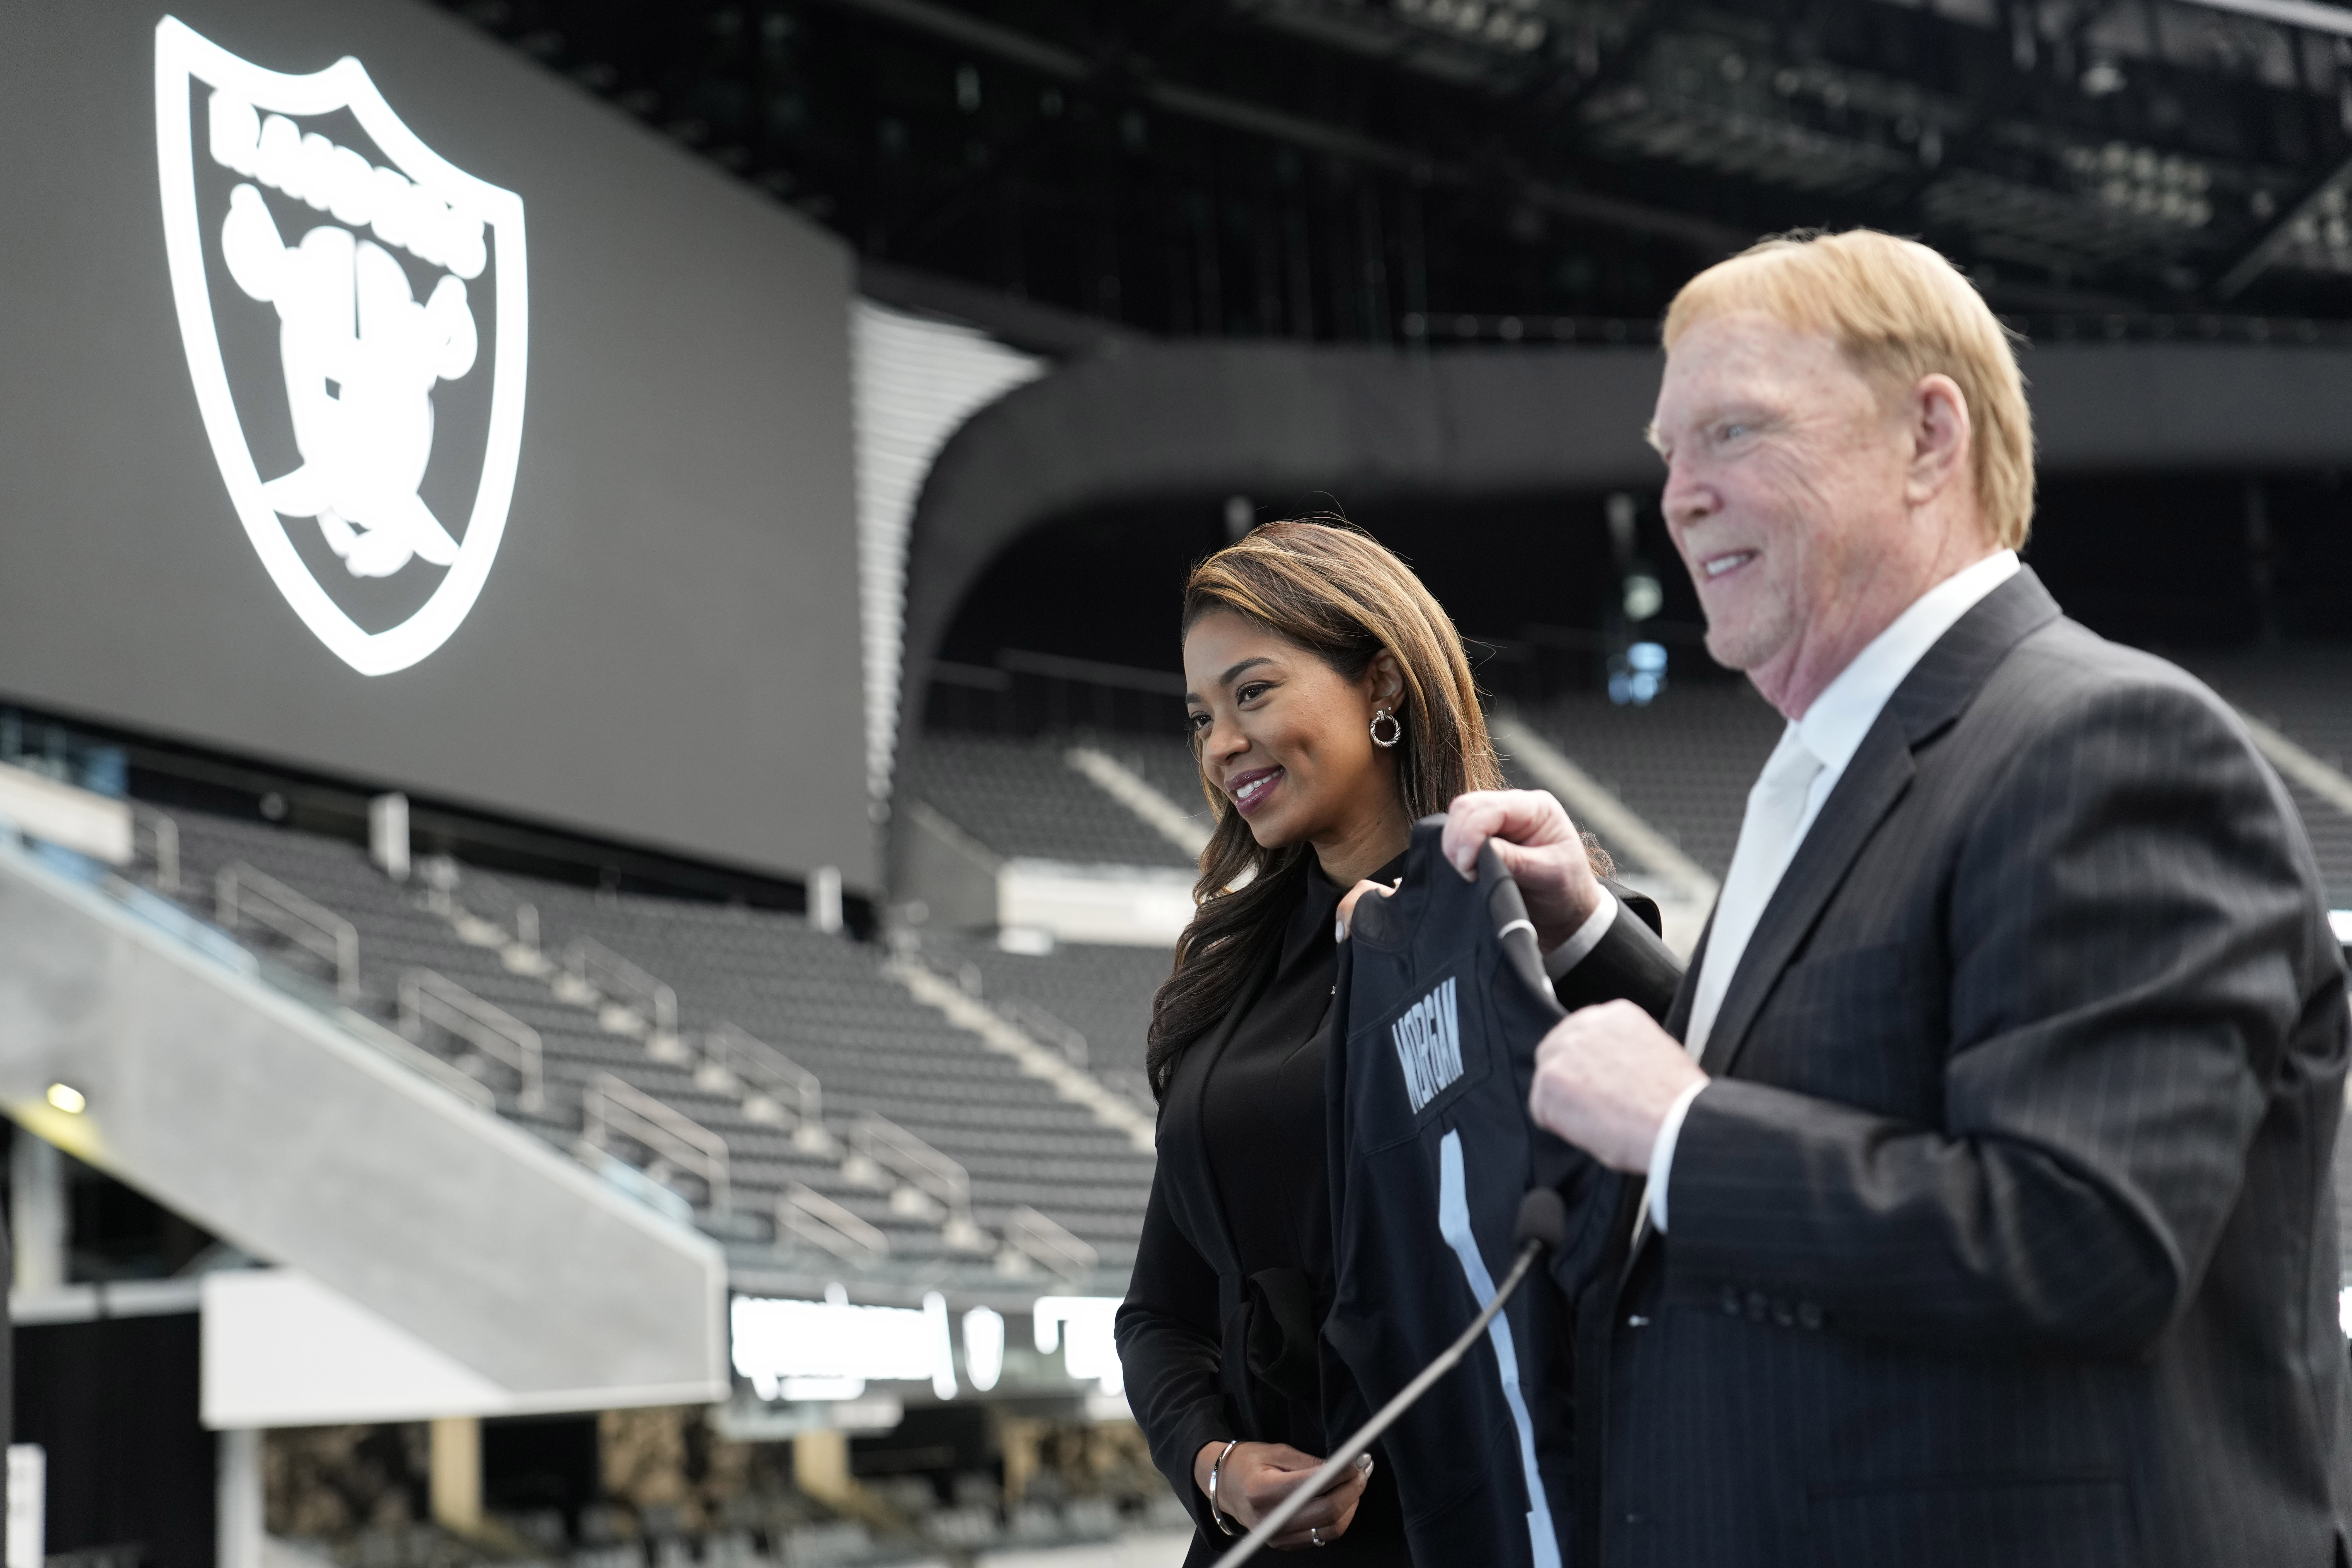 Raiders' Stadium Board Meeting Flooded with Job Applicants After